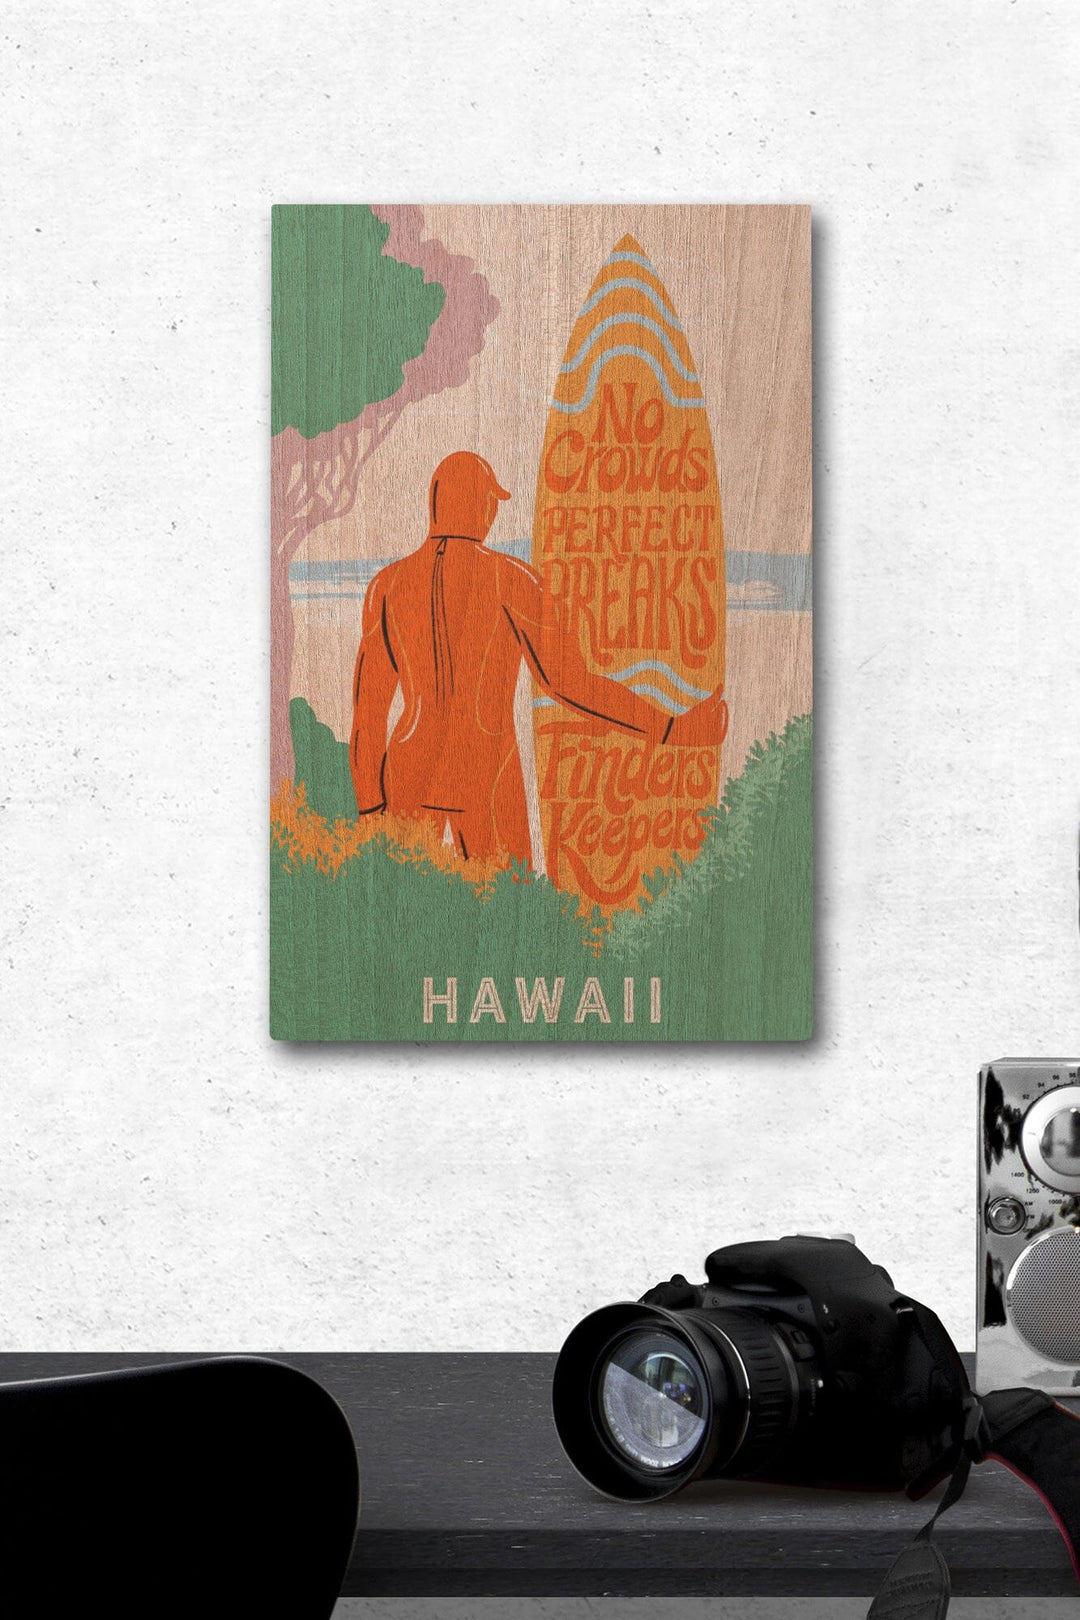 Hawaii, Secret Surf Spot Collection, Surfer at the Beach, No Crowds, Perfect Breaks, Finders Keepers, Lantern Press Artwork, Wood Signs and Postcards Wood Lantern Press 12 x 18 Wood Gallery Print 